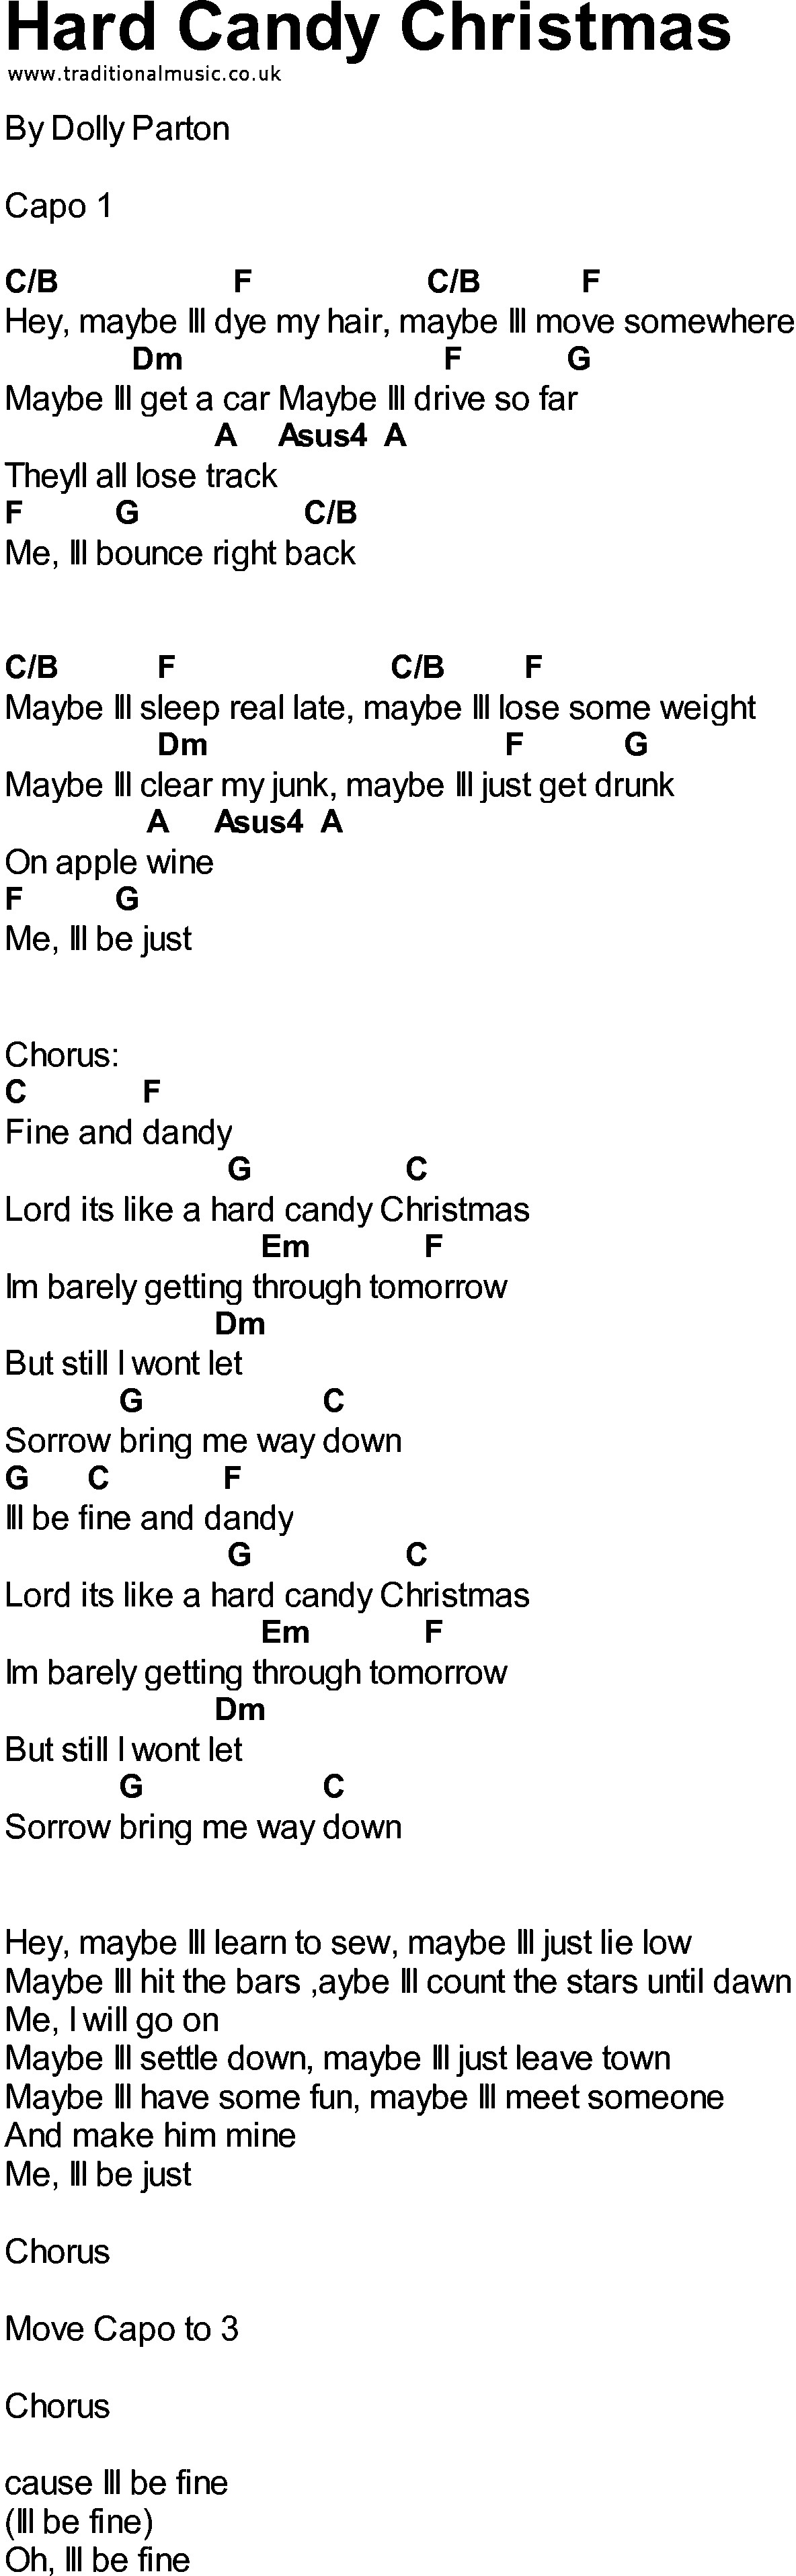 Hard Candy Christmas Song
 Bluegrass songs with chords Hard Candy Christmas